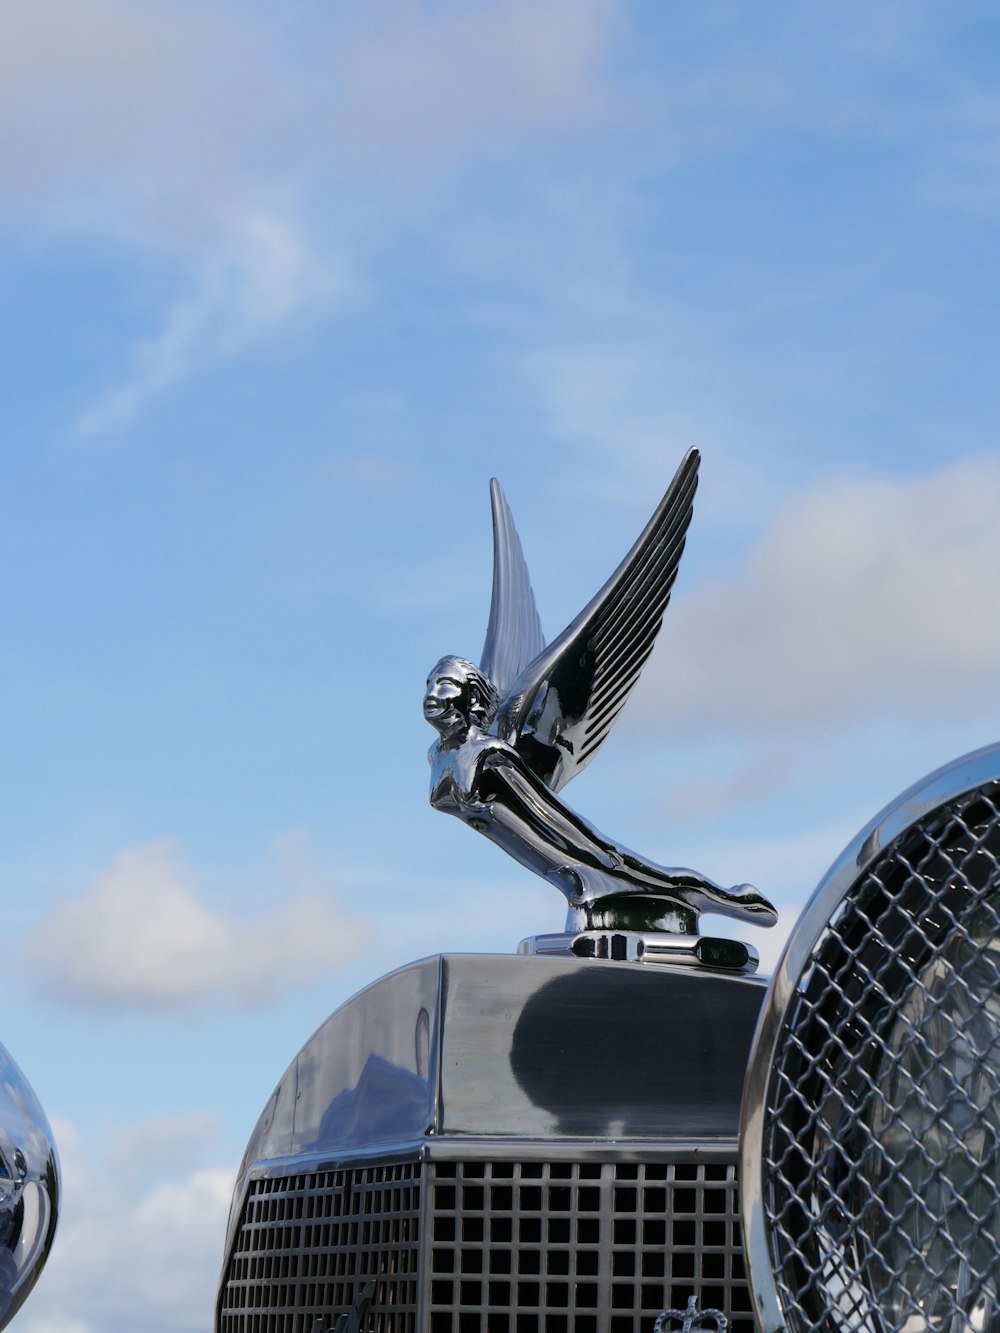 a close up of a car with a bird on top of it